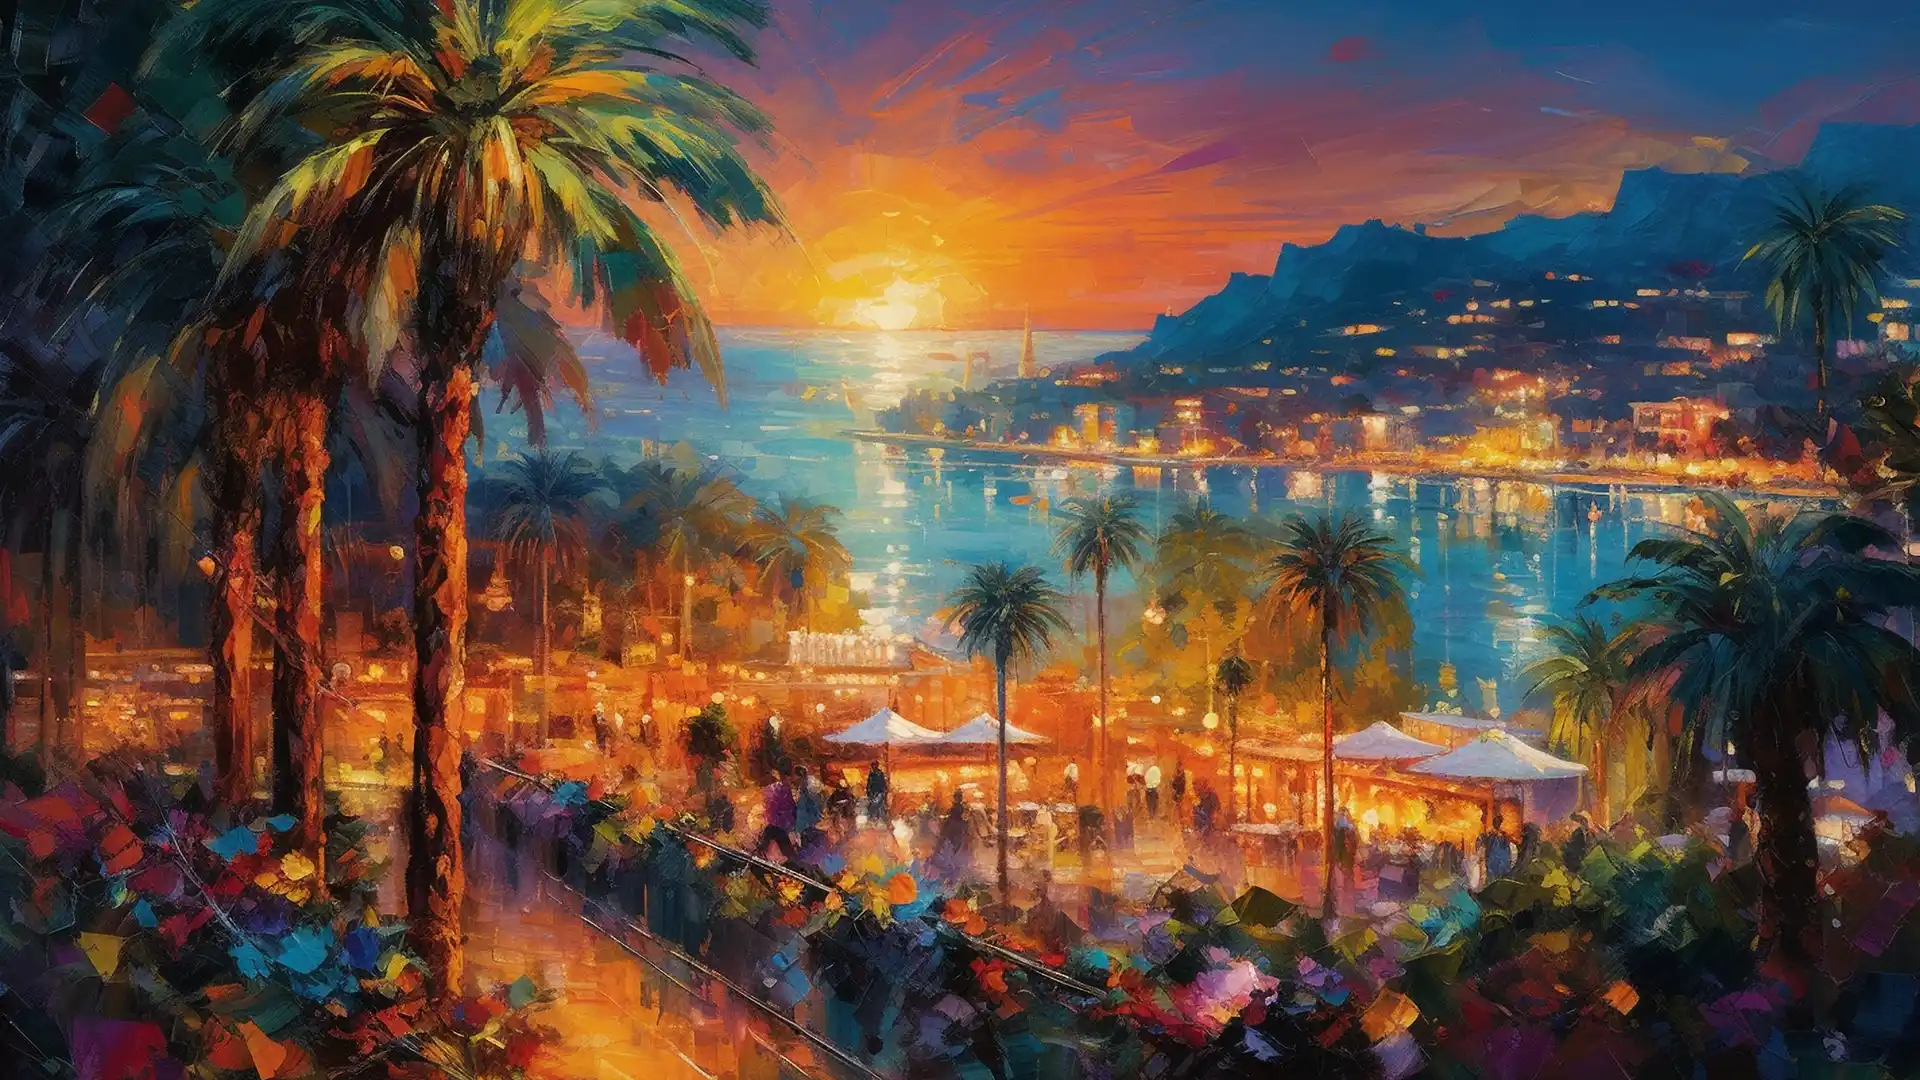 Vibrant scene of dancing people against a backdrop of the Turkish Riviera, palm trees, and a serene coastline, illuminated by multicolored lights.